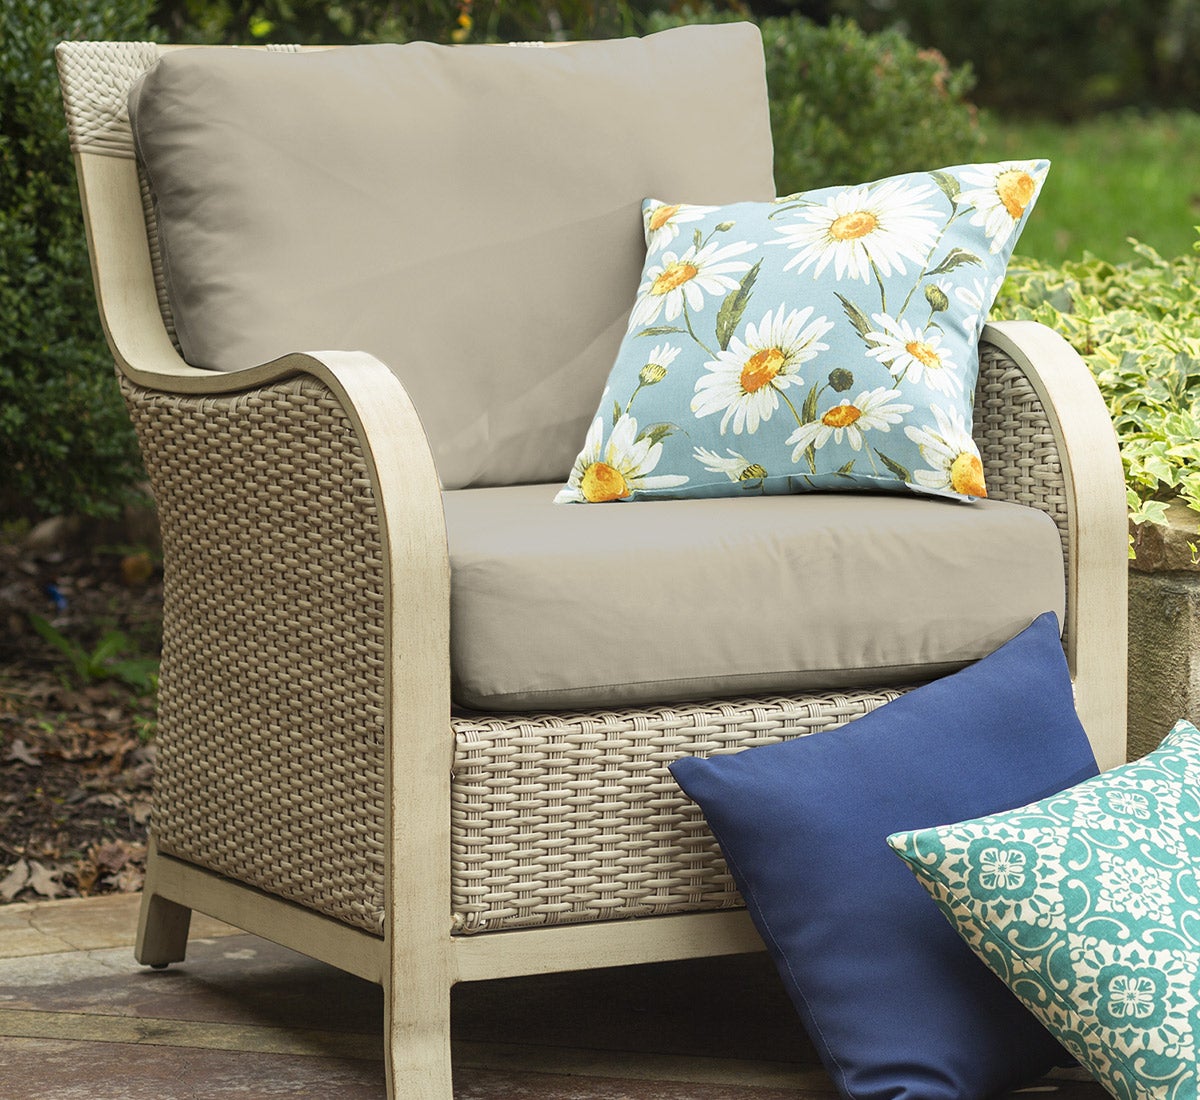 throw pillows on outdoor chair